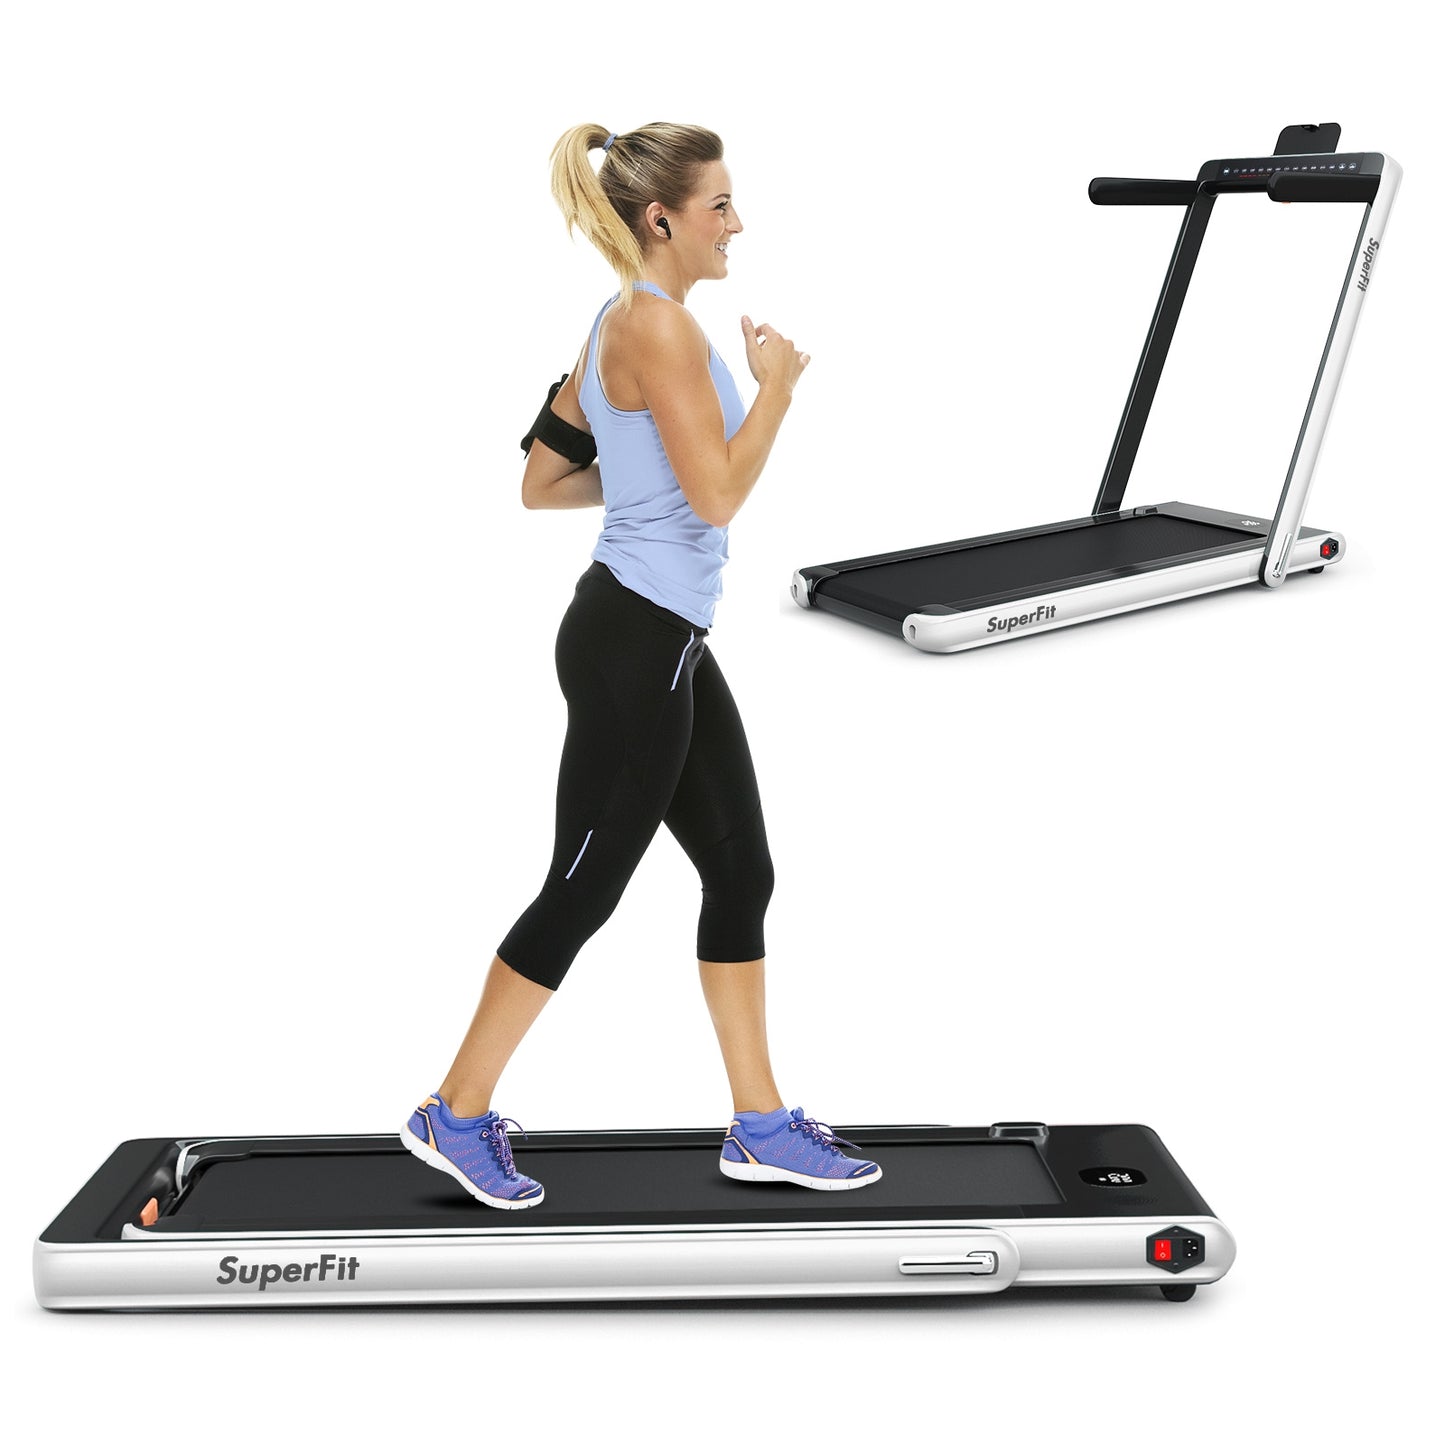 2-in-1 Electric Motorized Health and Fitness Folding Treadmill with Dual Display and Speaker-White